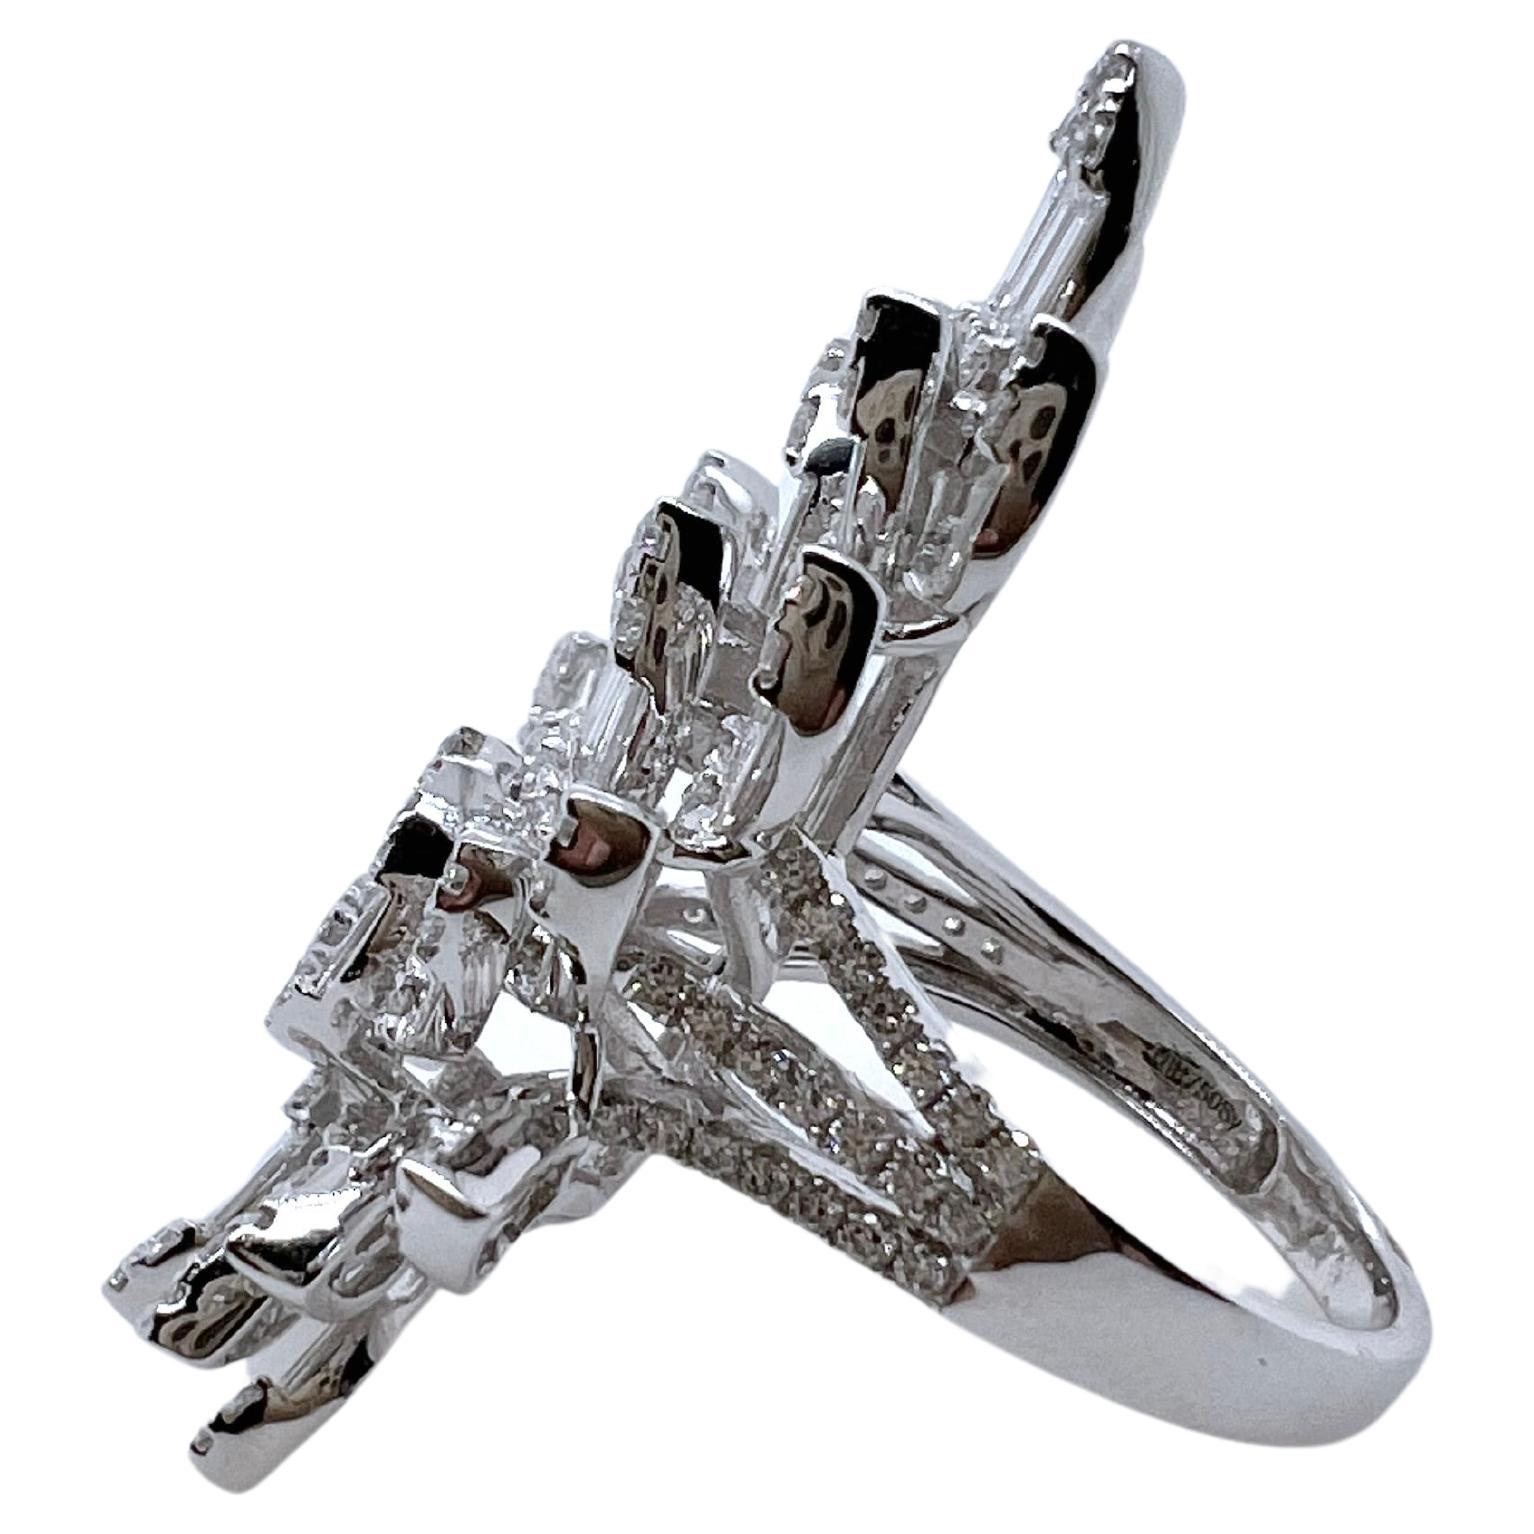 This elaborate diamond ring is bold and fierce. The baguettes are channeled set with the round brilliant diamonds being prong set. The asymmetrical design gives it an iconic look that will draw everyone's gaze and attention. The baguettes shimmer